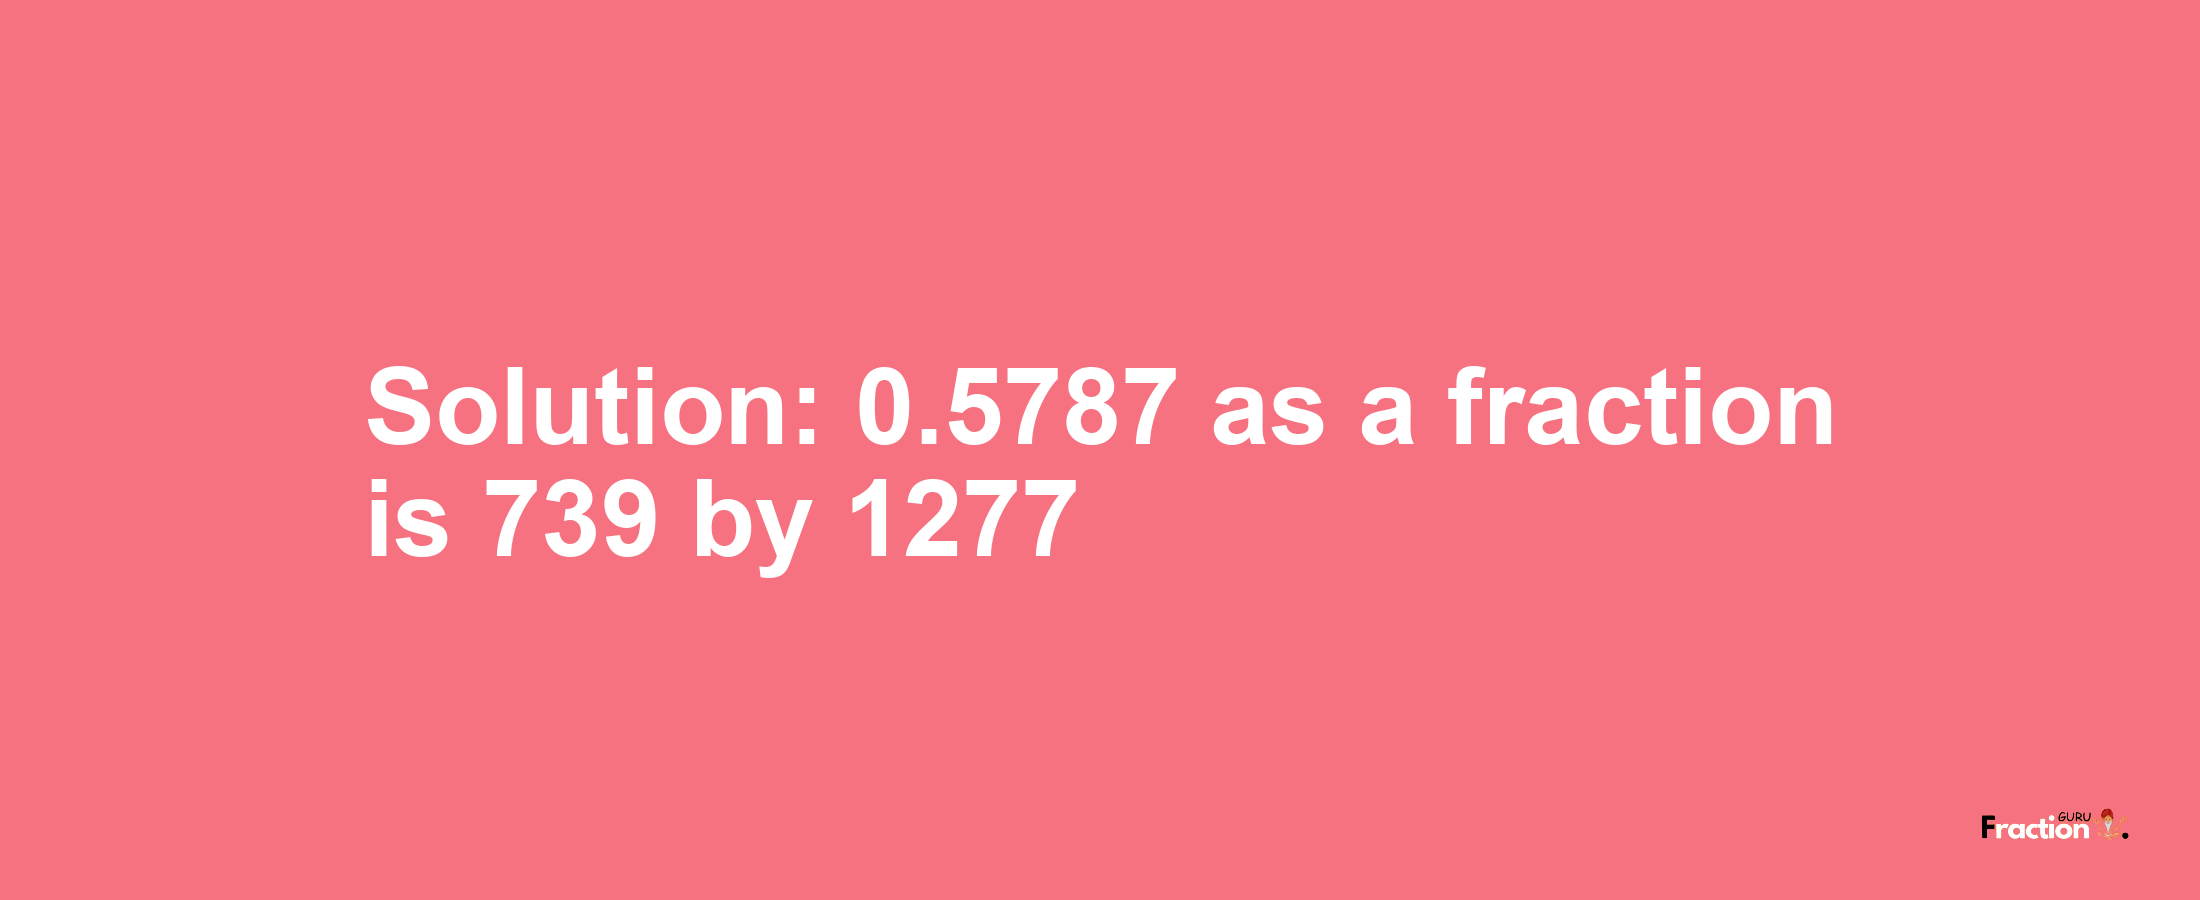 Solution:0.5787 as a fraction is 739/1277